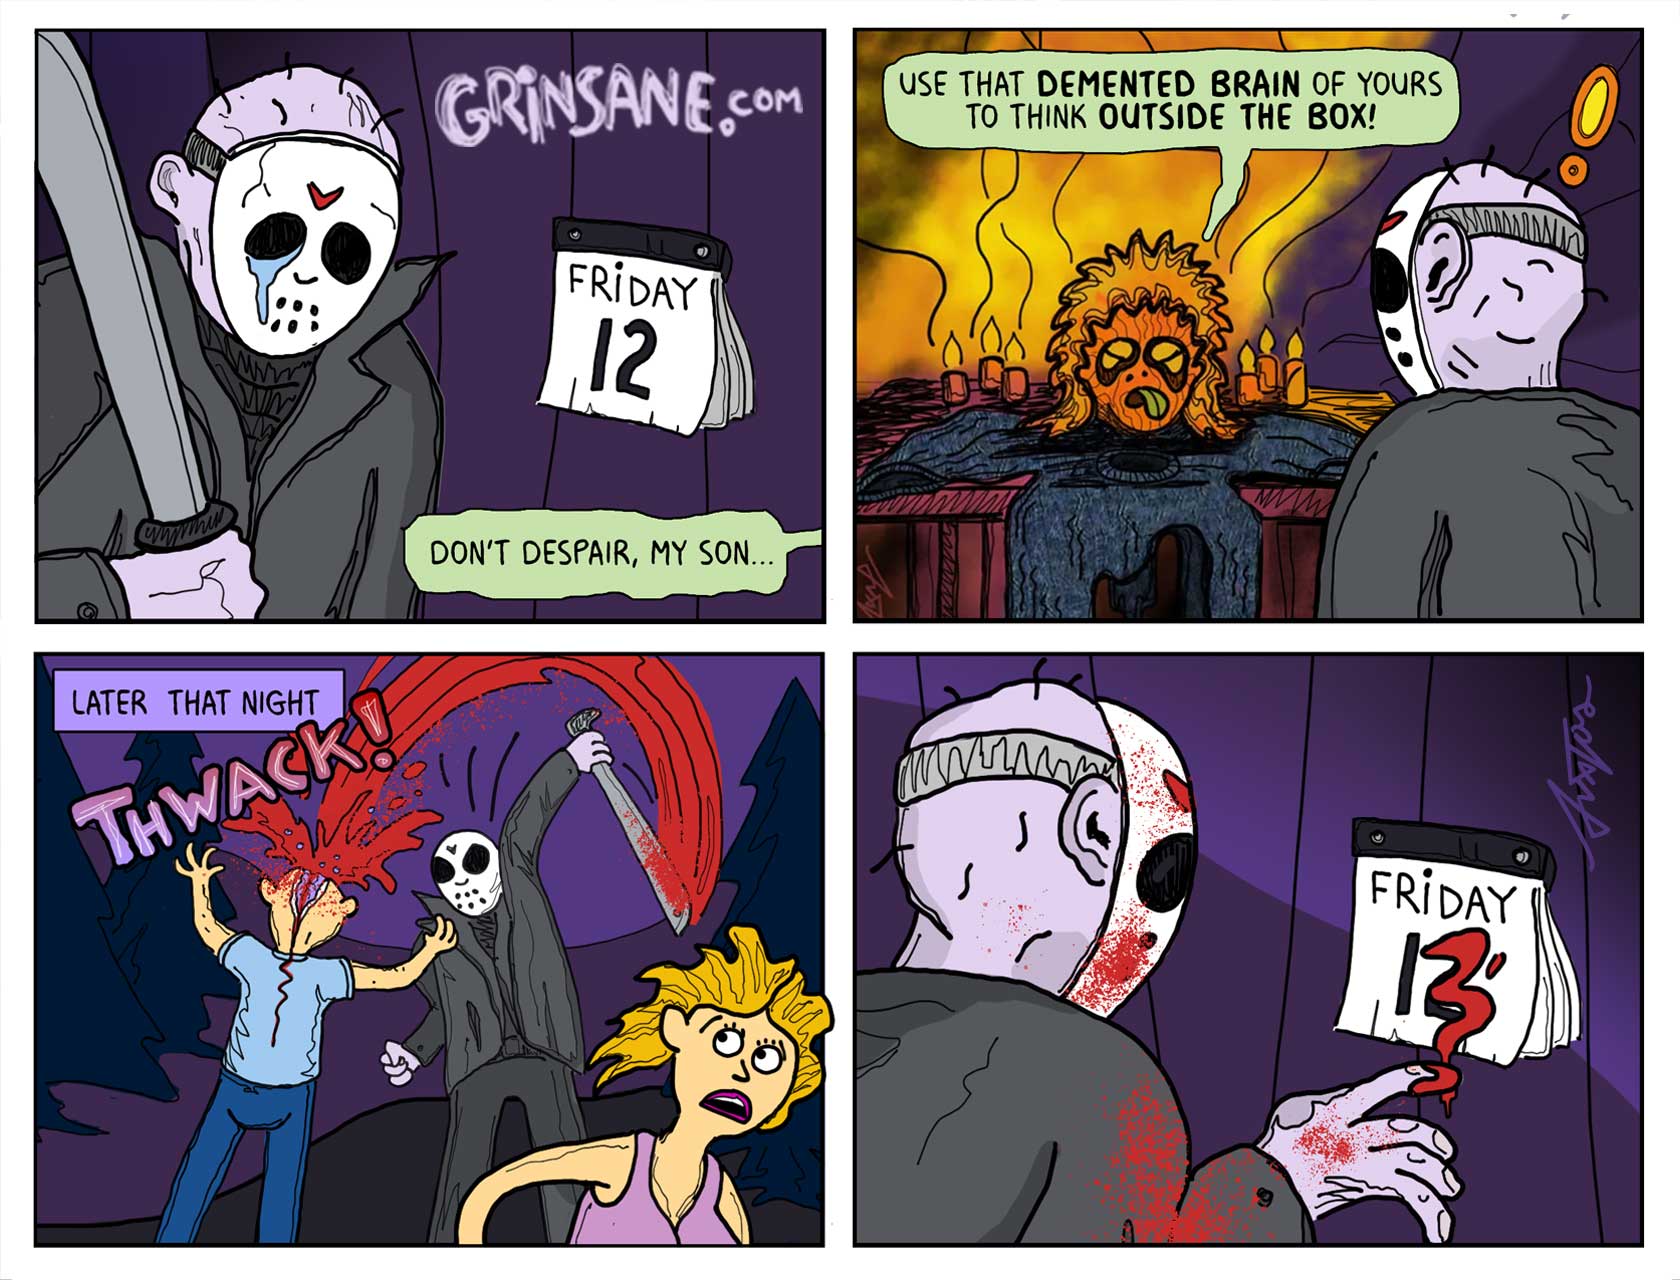 Friday the 12th - Grinsane